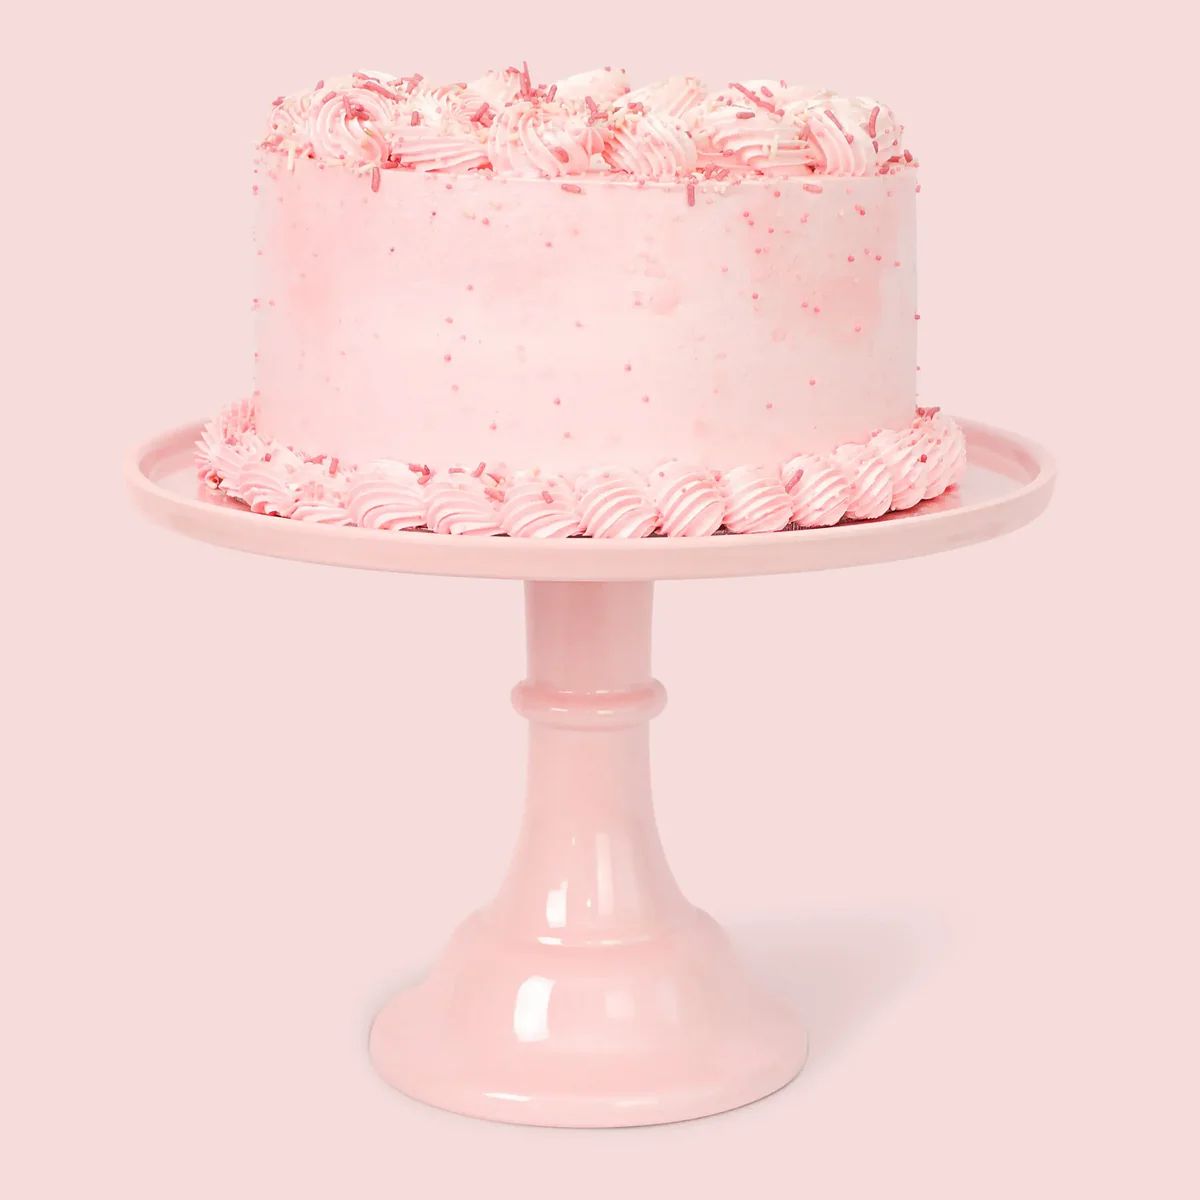 Melamine Cake Stand - Peony Pink | Ellie and Piper